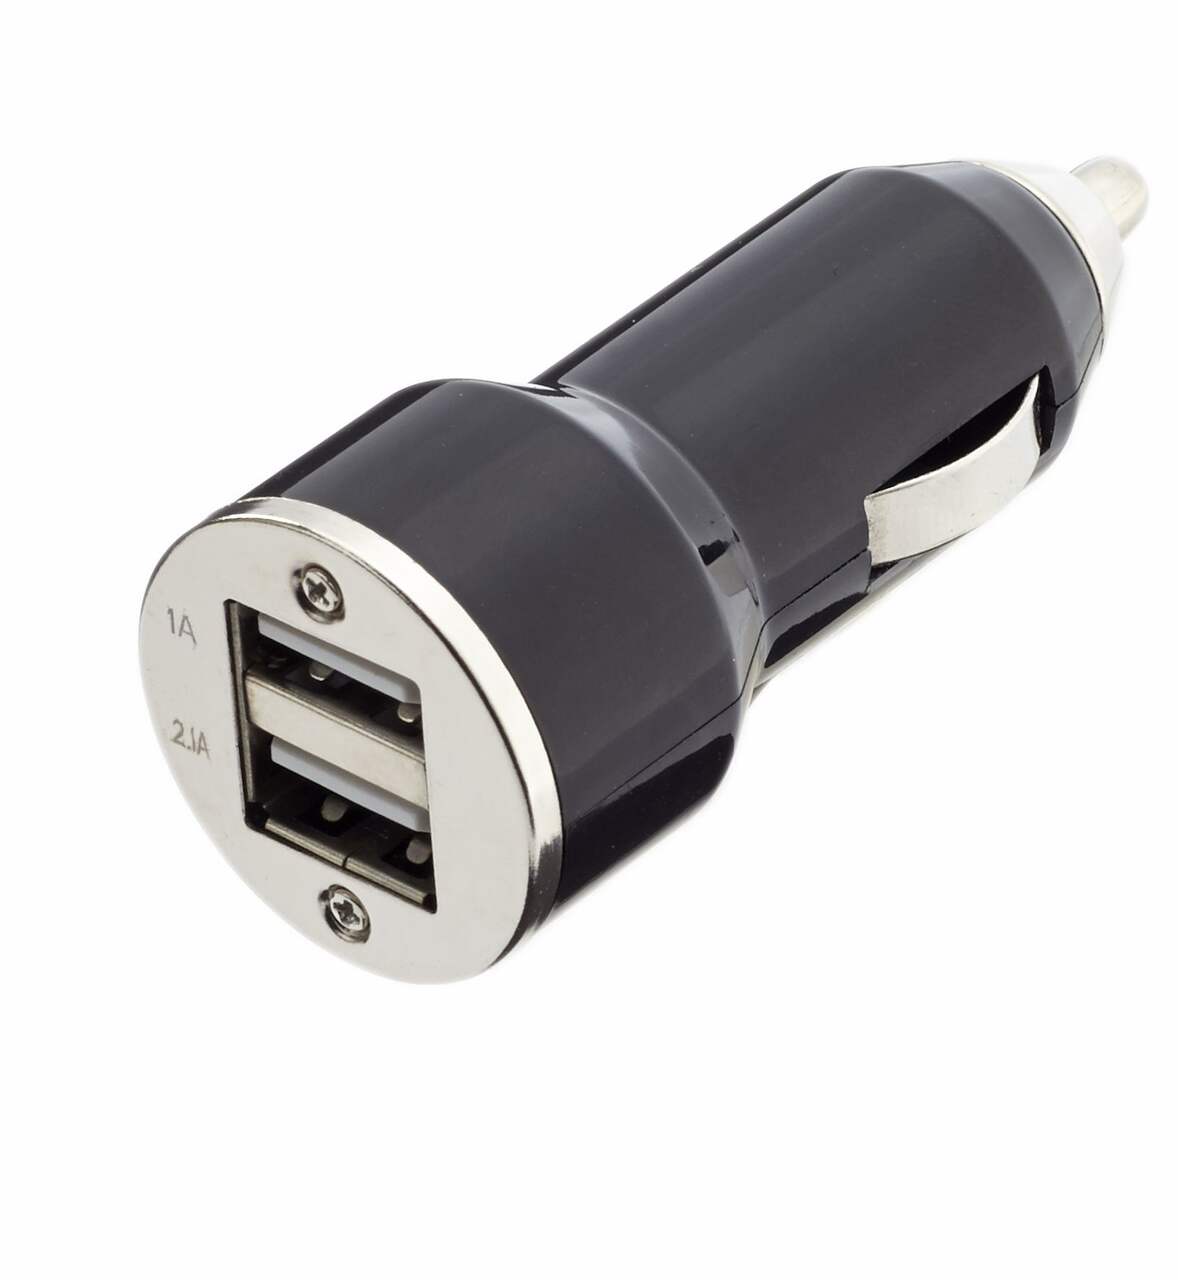 https://media-www.canadiantire.ca/product/automotive/car-care-accessories/auto-electronics/2995446/dual-port-car-charger-fb4b566d-4b9f-4b52-8c26-b6b1a1dc6abc-jpgrendition.jpg?imdensity=1&imwidth=640&impolicy=mZoom